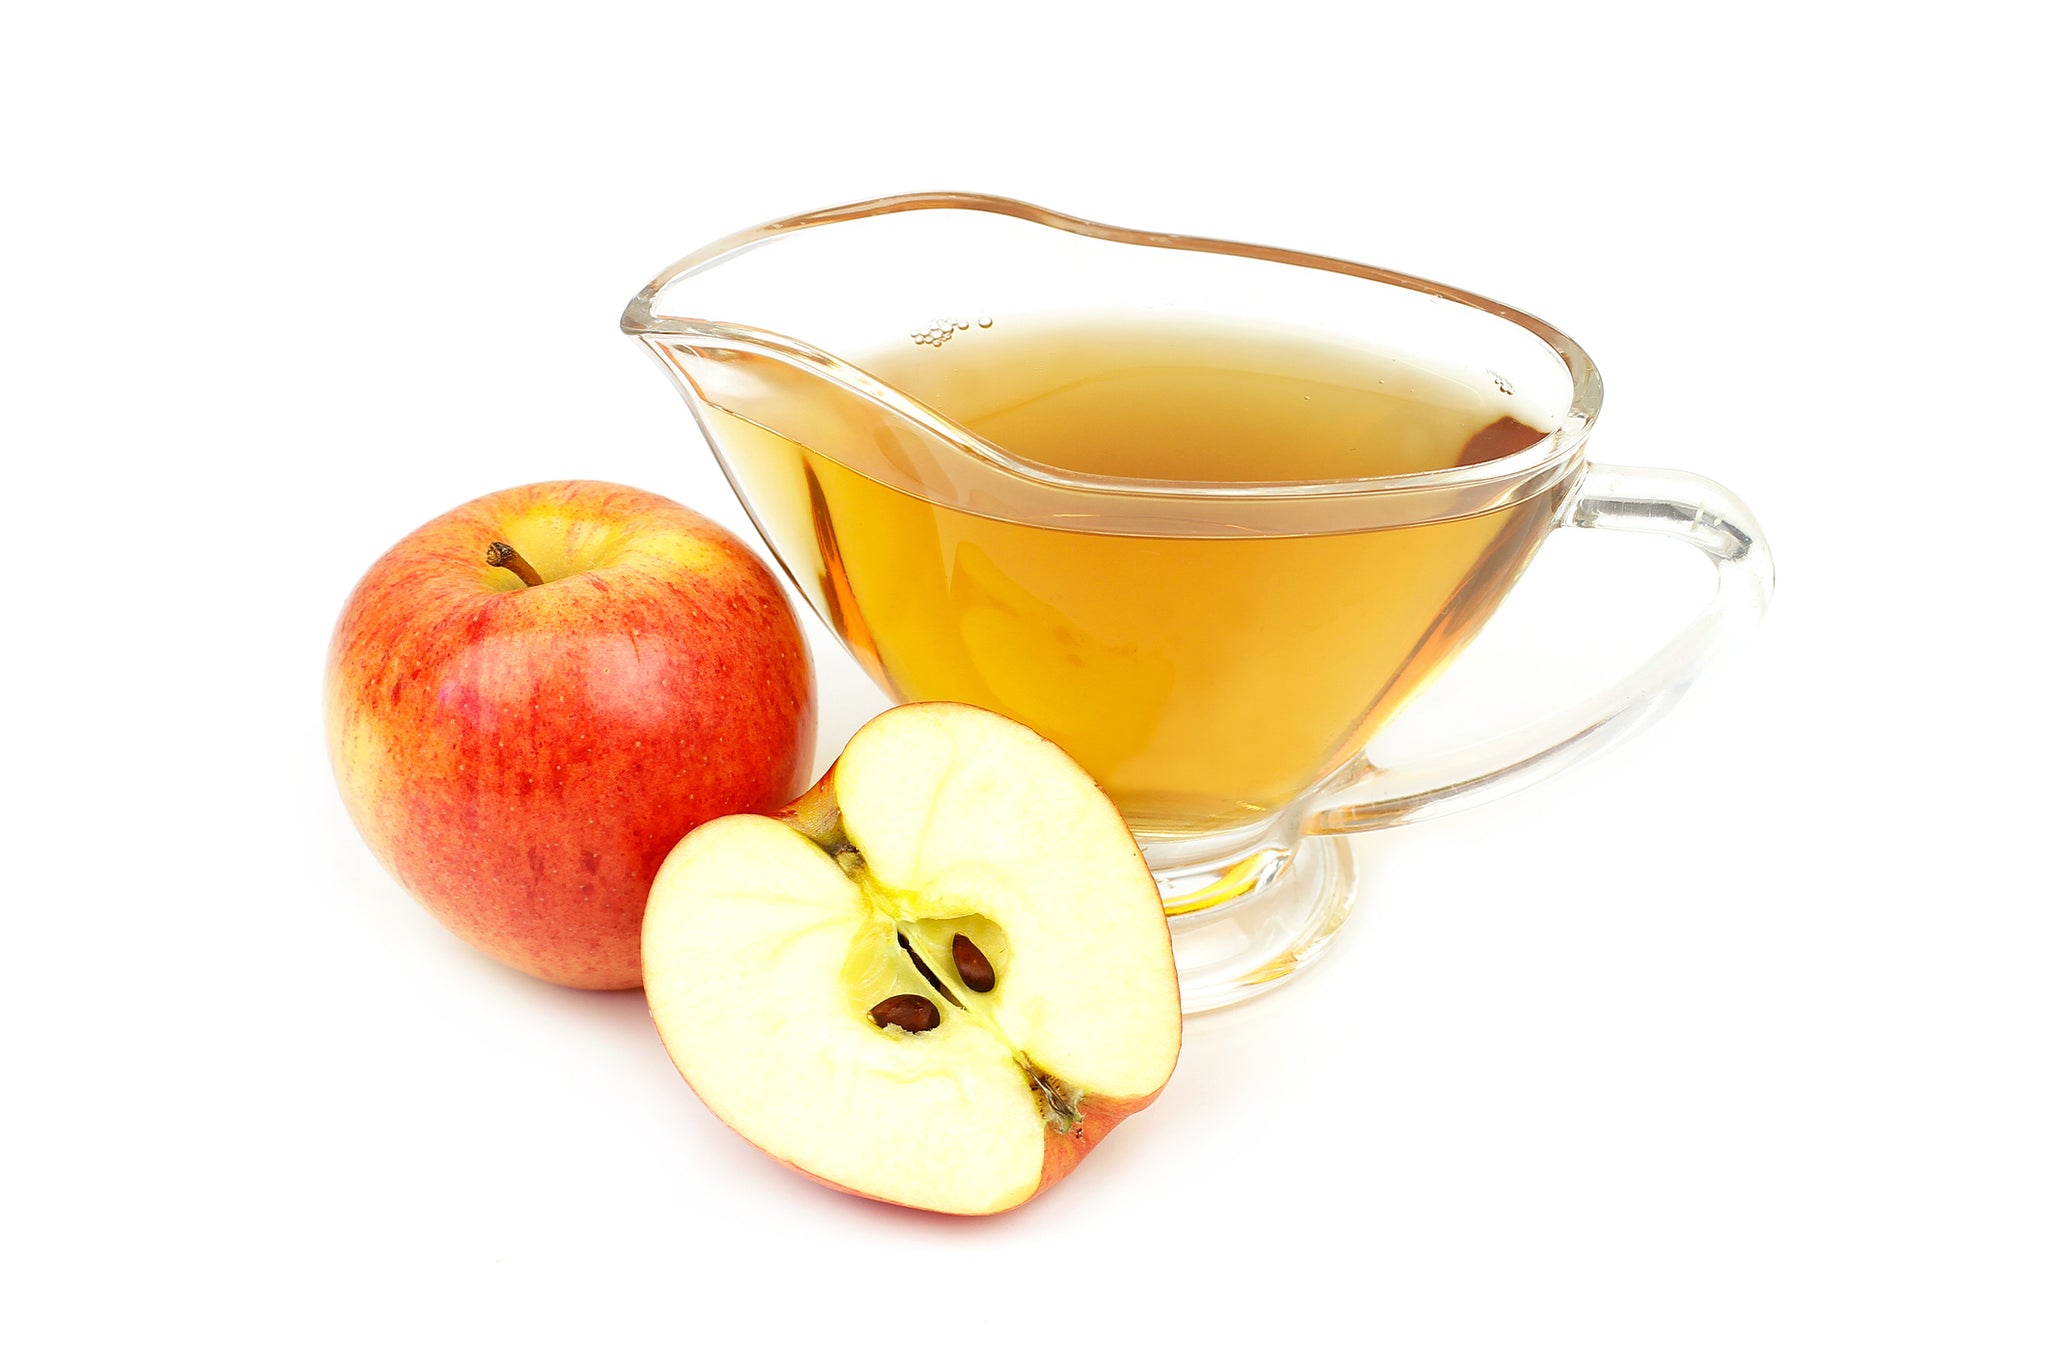 Apple Cider Vinegar - the pros and cons of a daily ACV shot